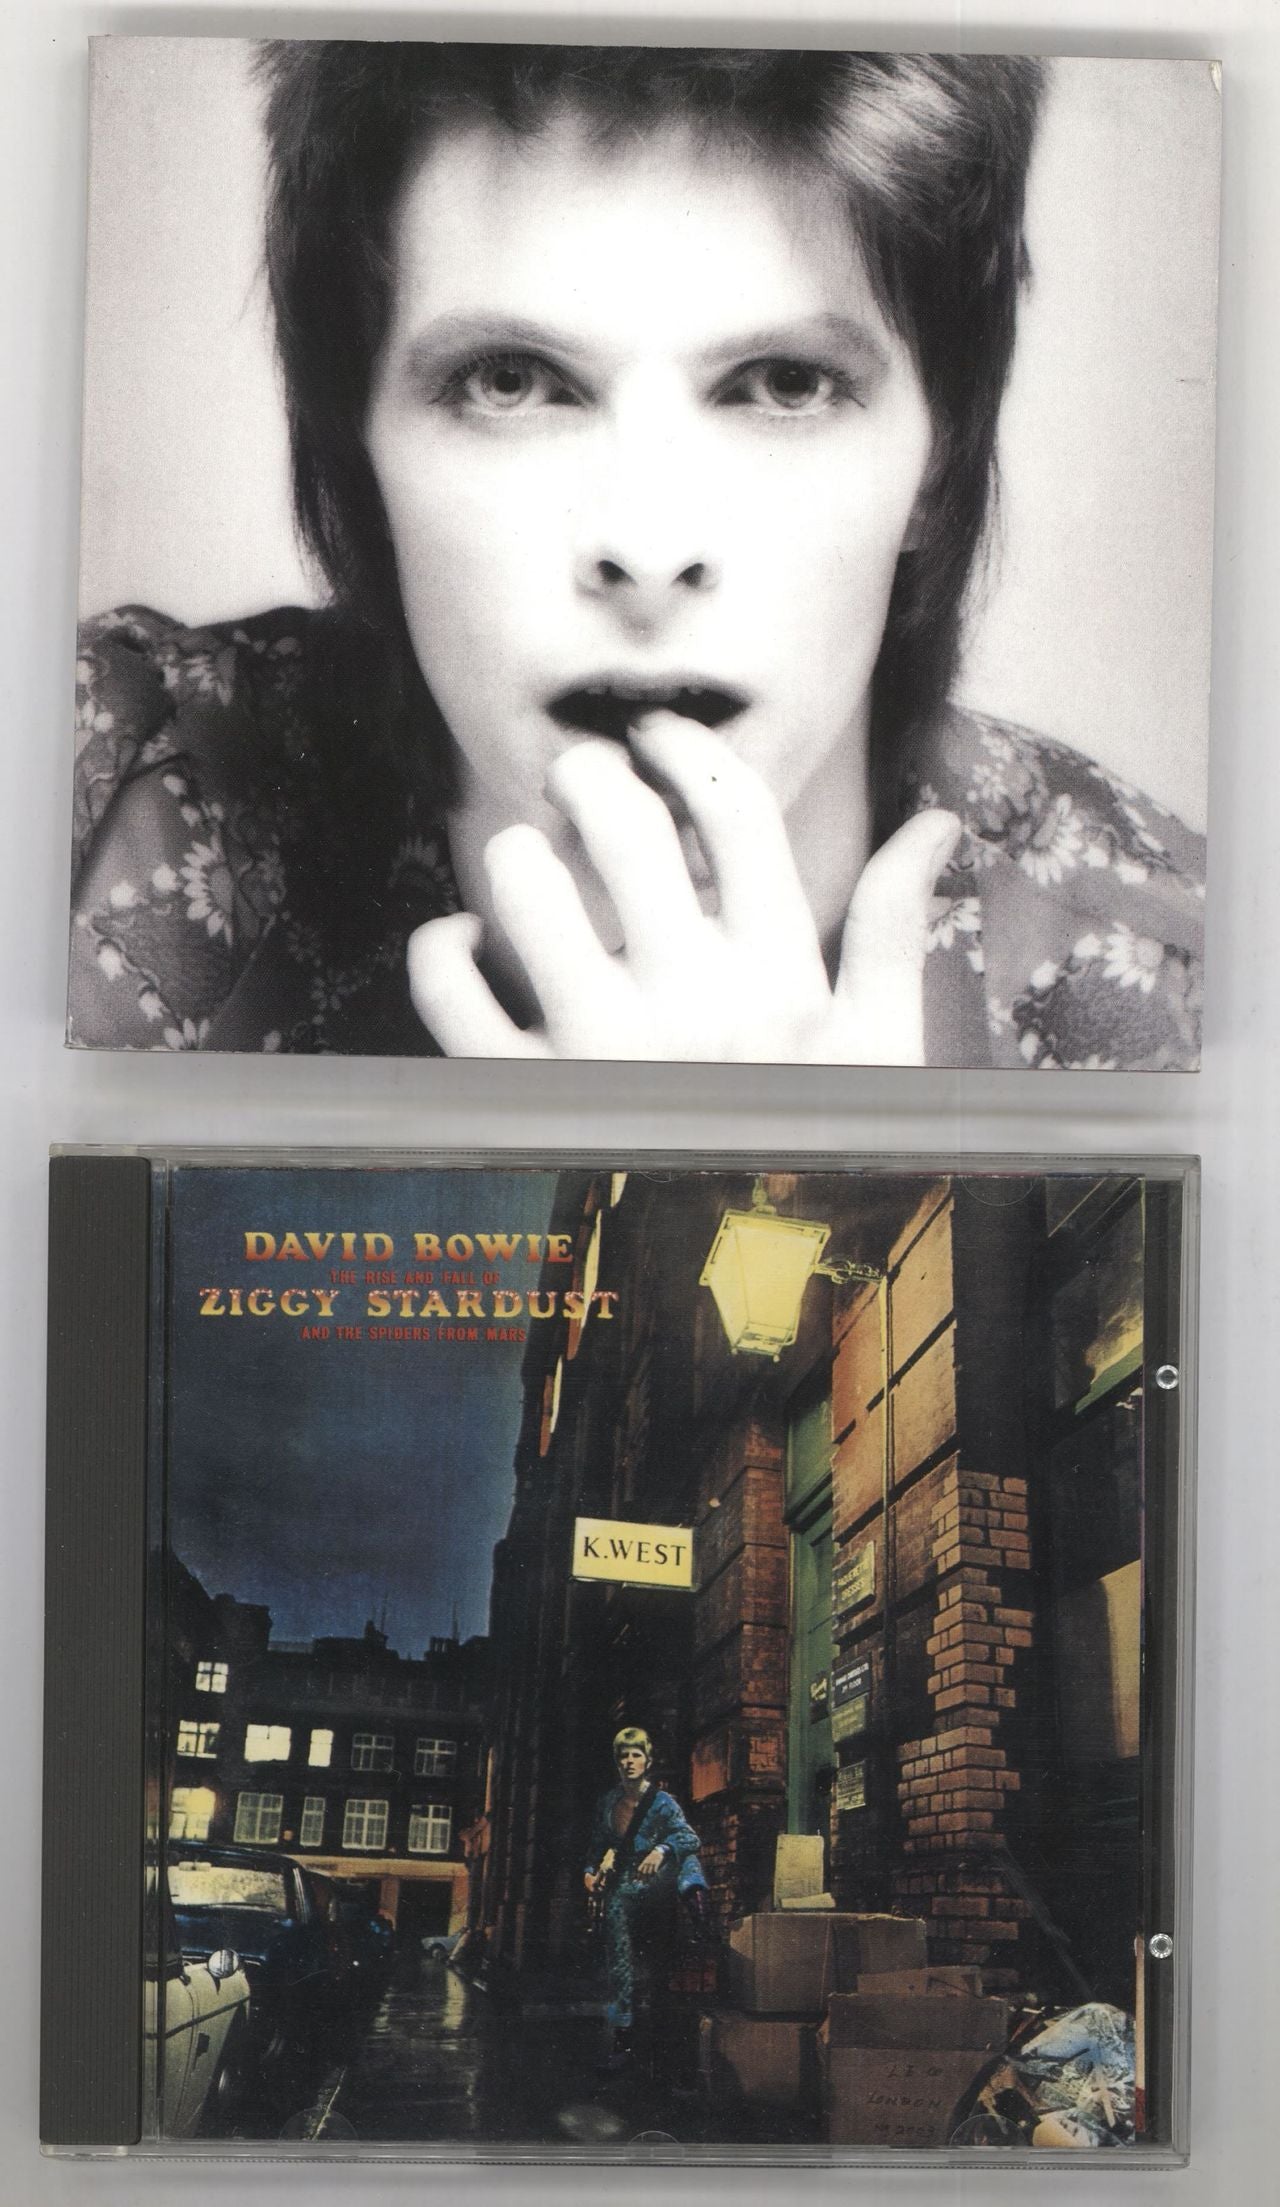 David Bowie The Rise And Fall Of Ziggy Stardust UK Cd album box set